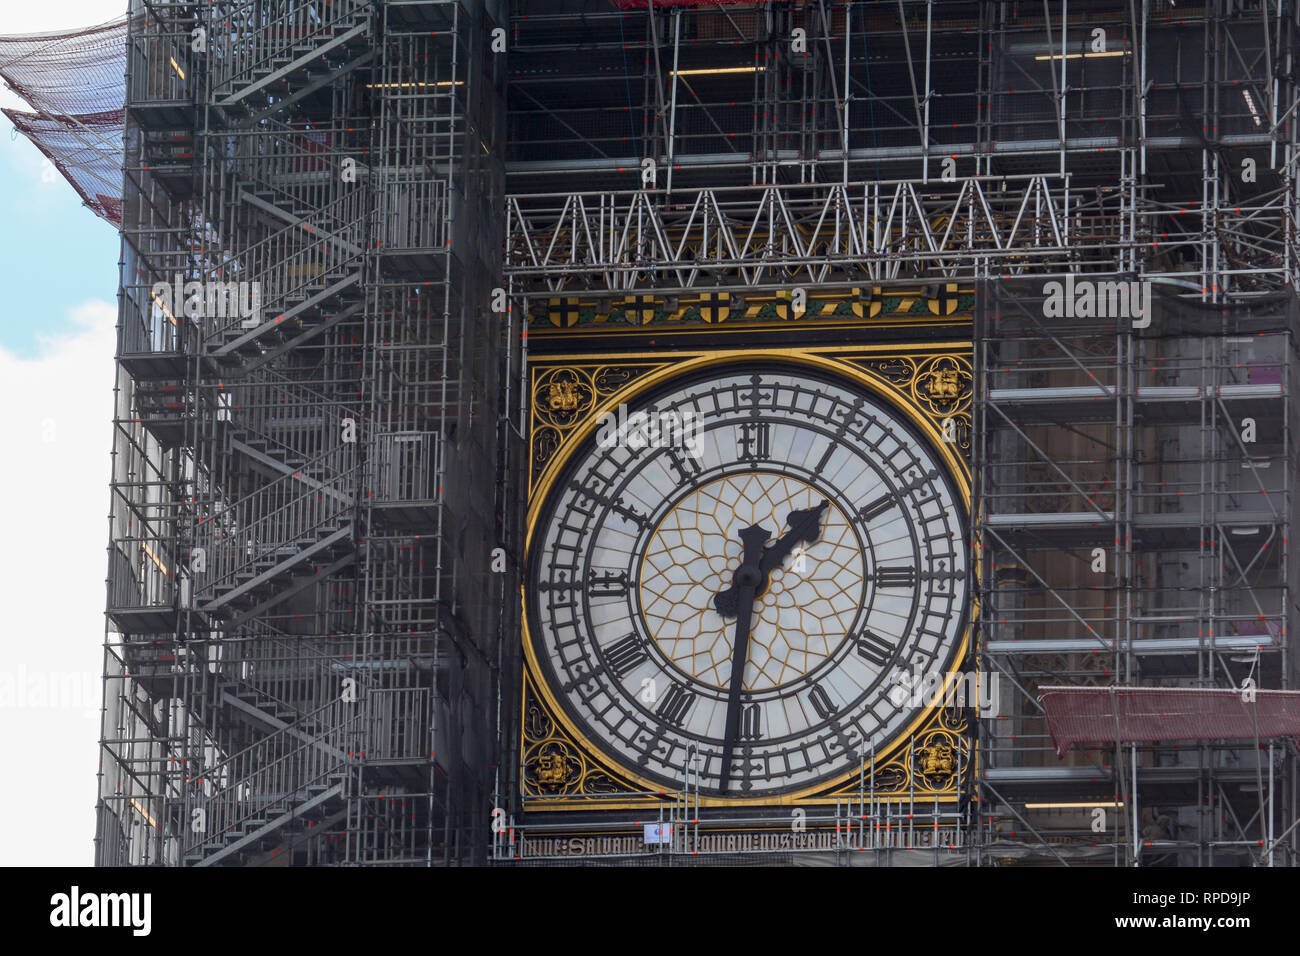 Big Ben in central London with scaffold during cleaning and refurb work Stock Photo